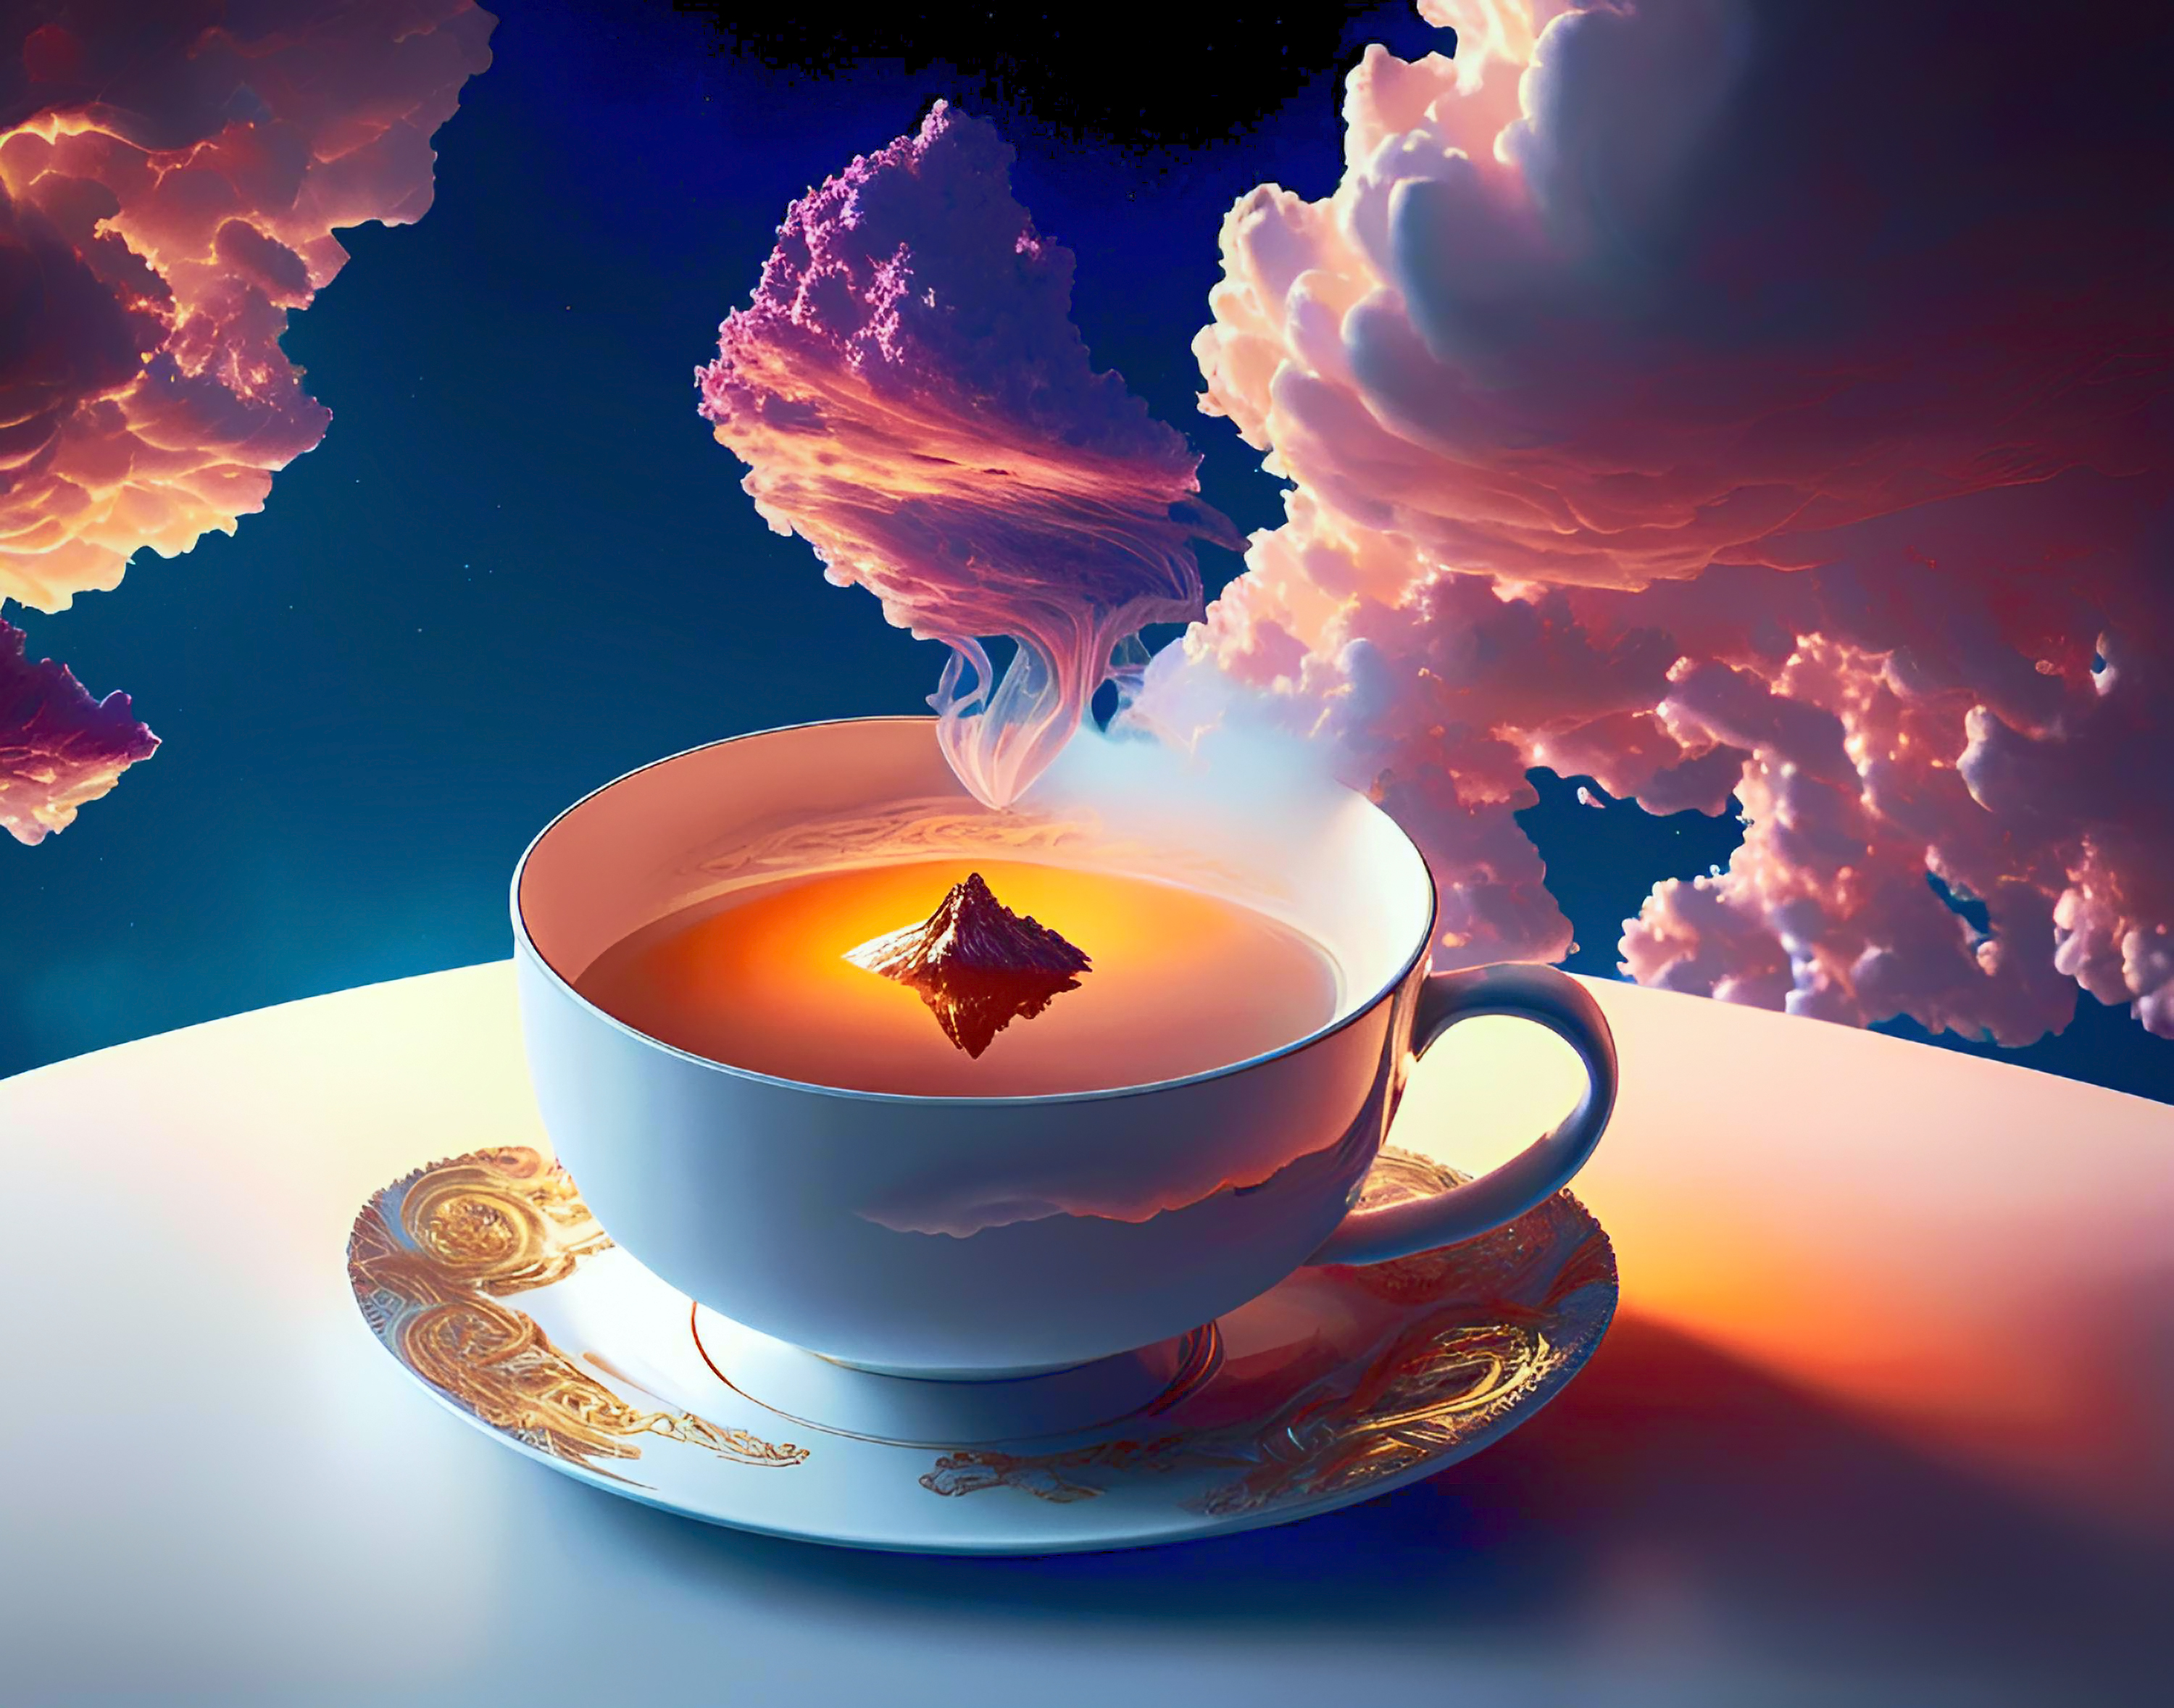 Free photo A cup with clouds inside which you can see a mountain